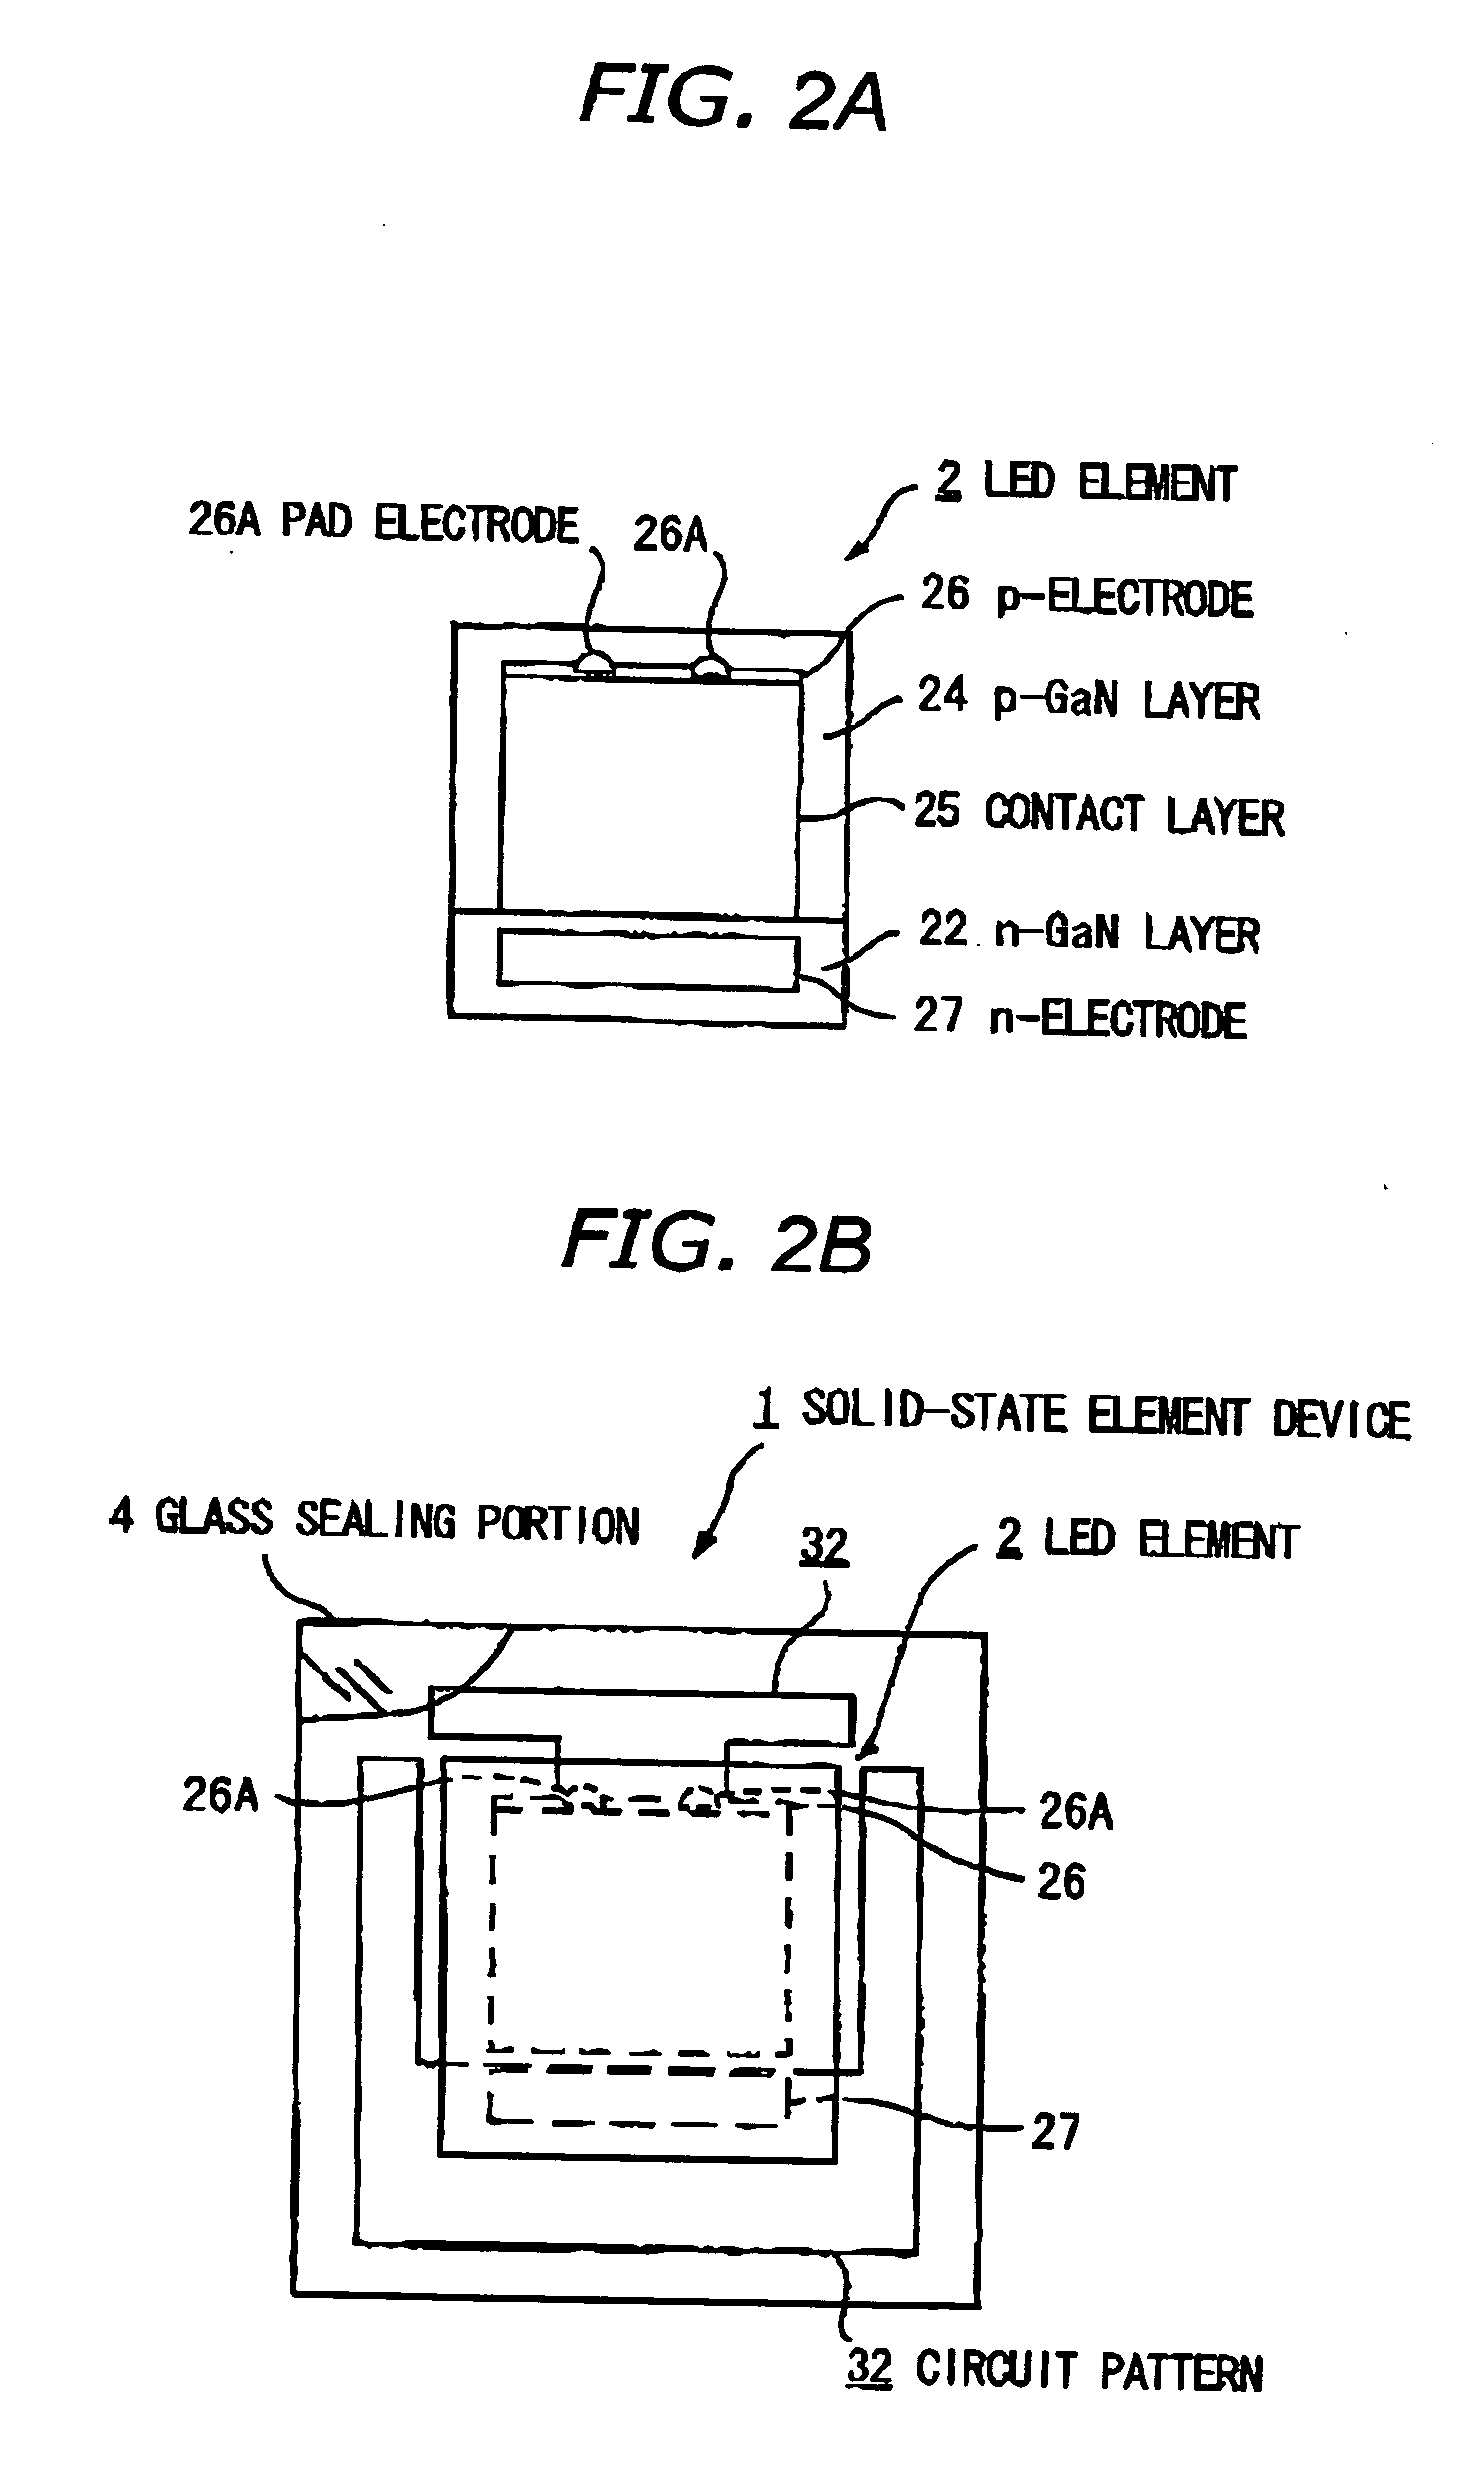 Solid-state element device